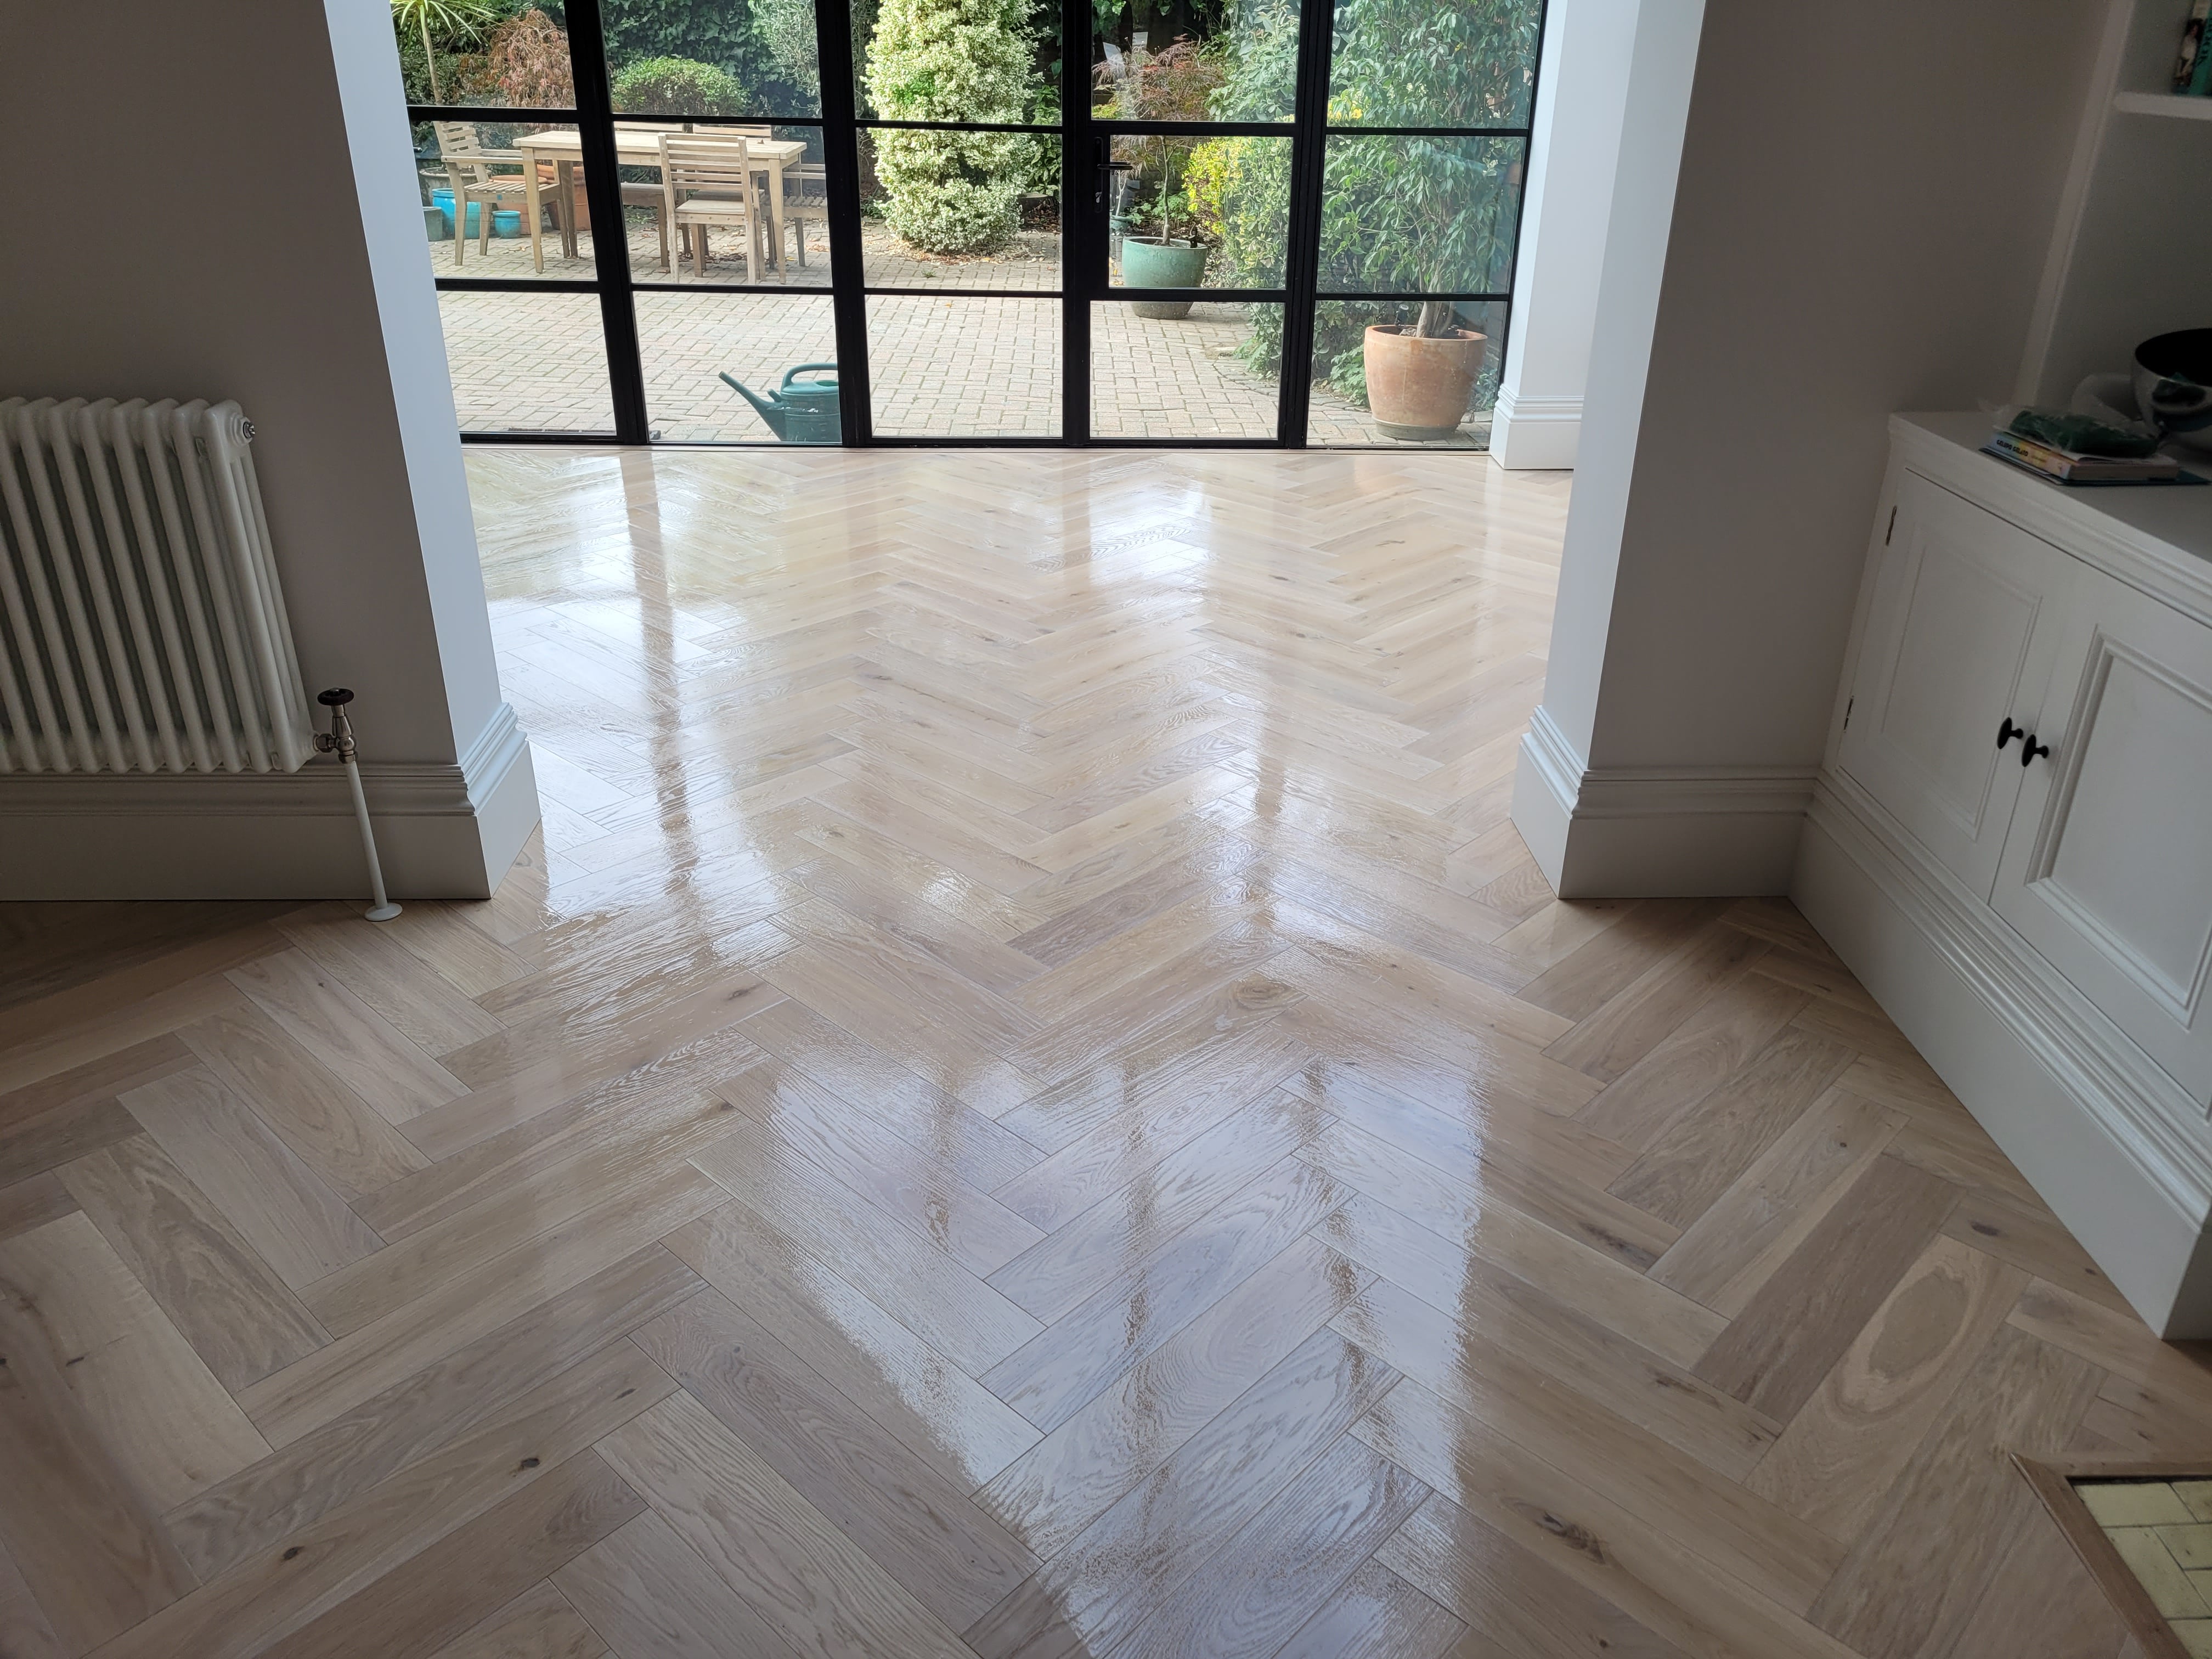 Expertly restored 5-year-old hardwood floor in Belmont, SM2. Mr Sander® used Bona 2K Frost whitewashing and Traffic HD 15% sheen matte lacquer. Durable and stunning, this finish guarantees long-lasting beauty.
